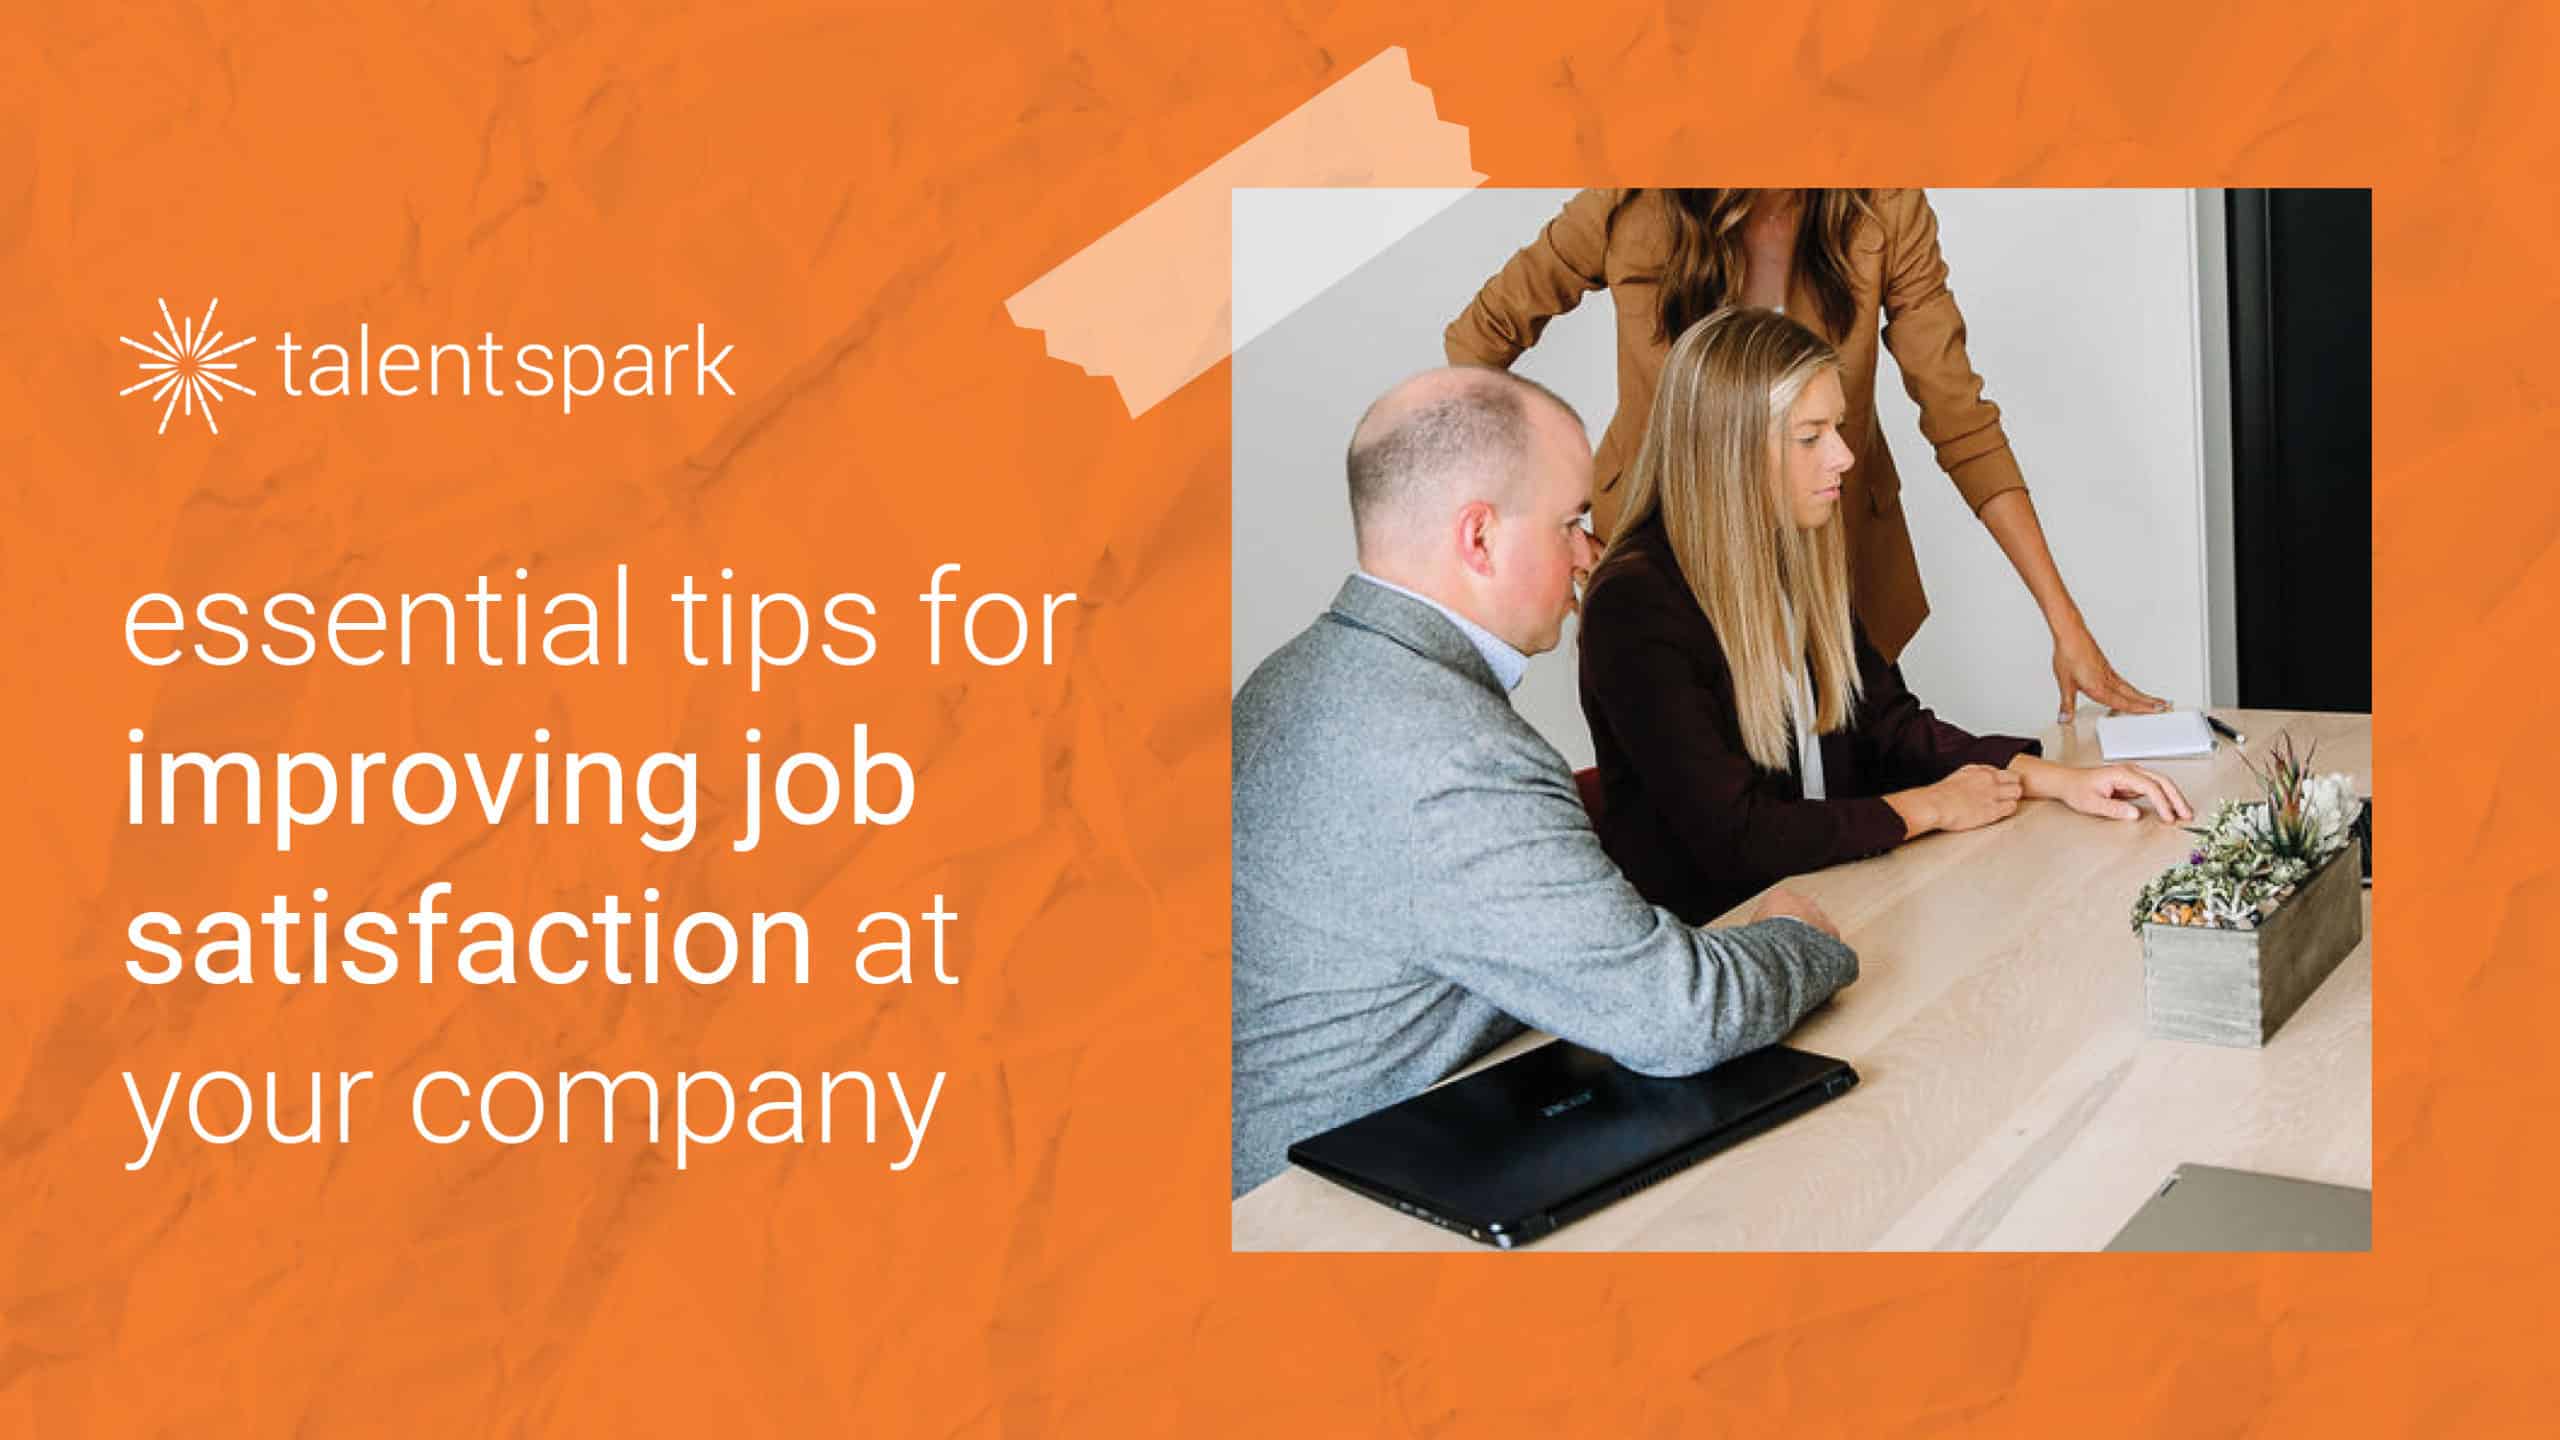 5 Essential Tips for Improving Job Satisfaction at Your Company featured image